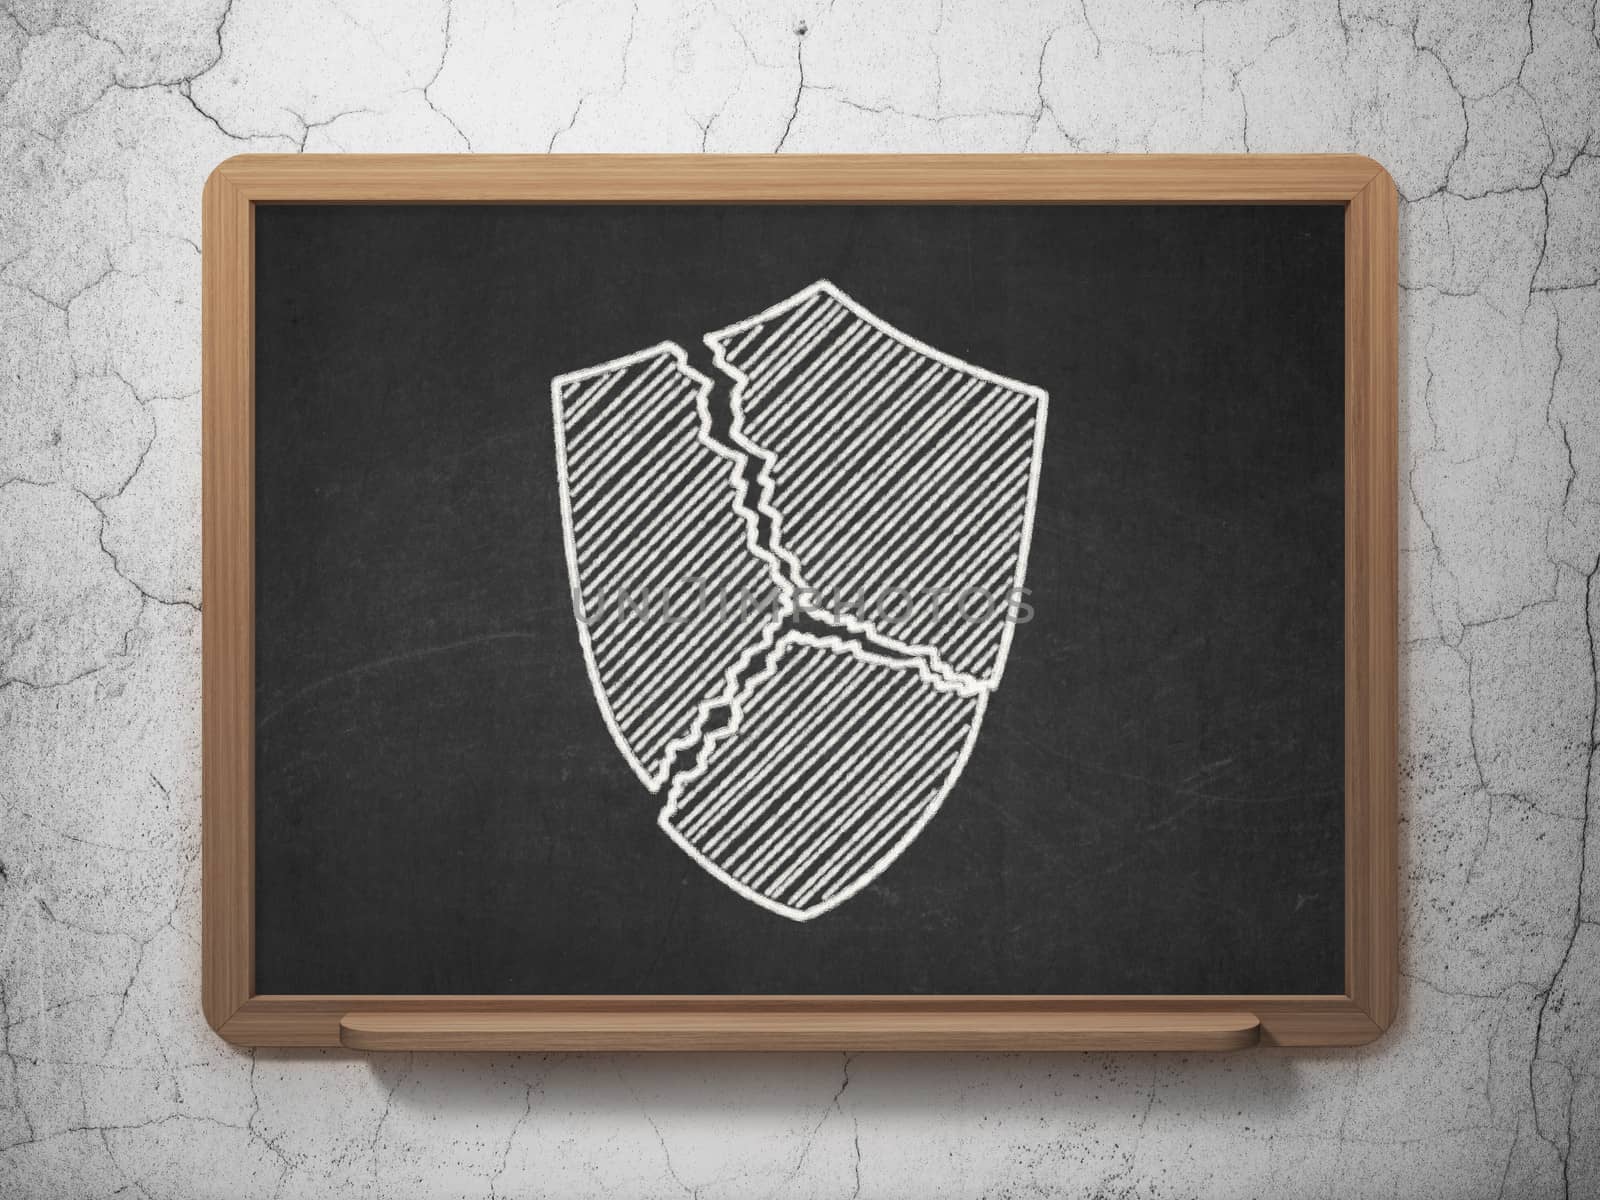 Protection concept: Broken Shield icon on Black chalkboard on grunge wall background, 3d render